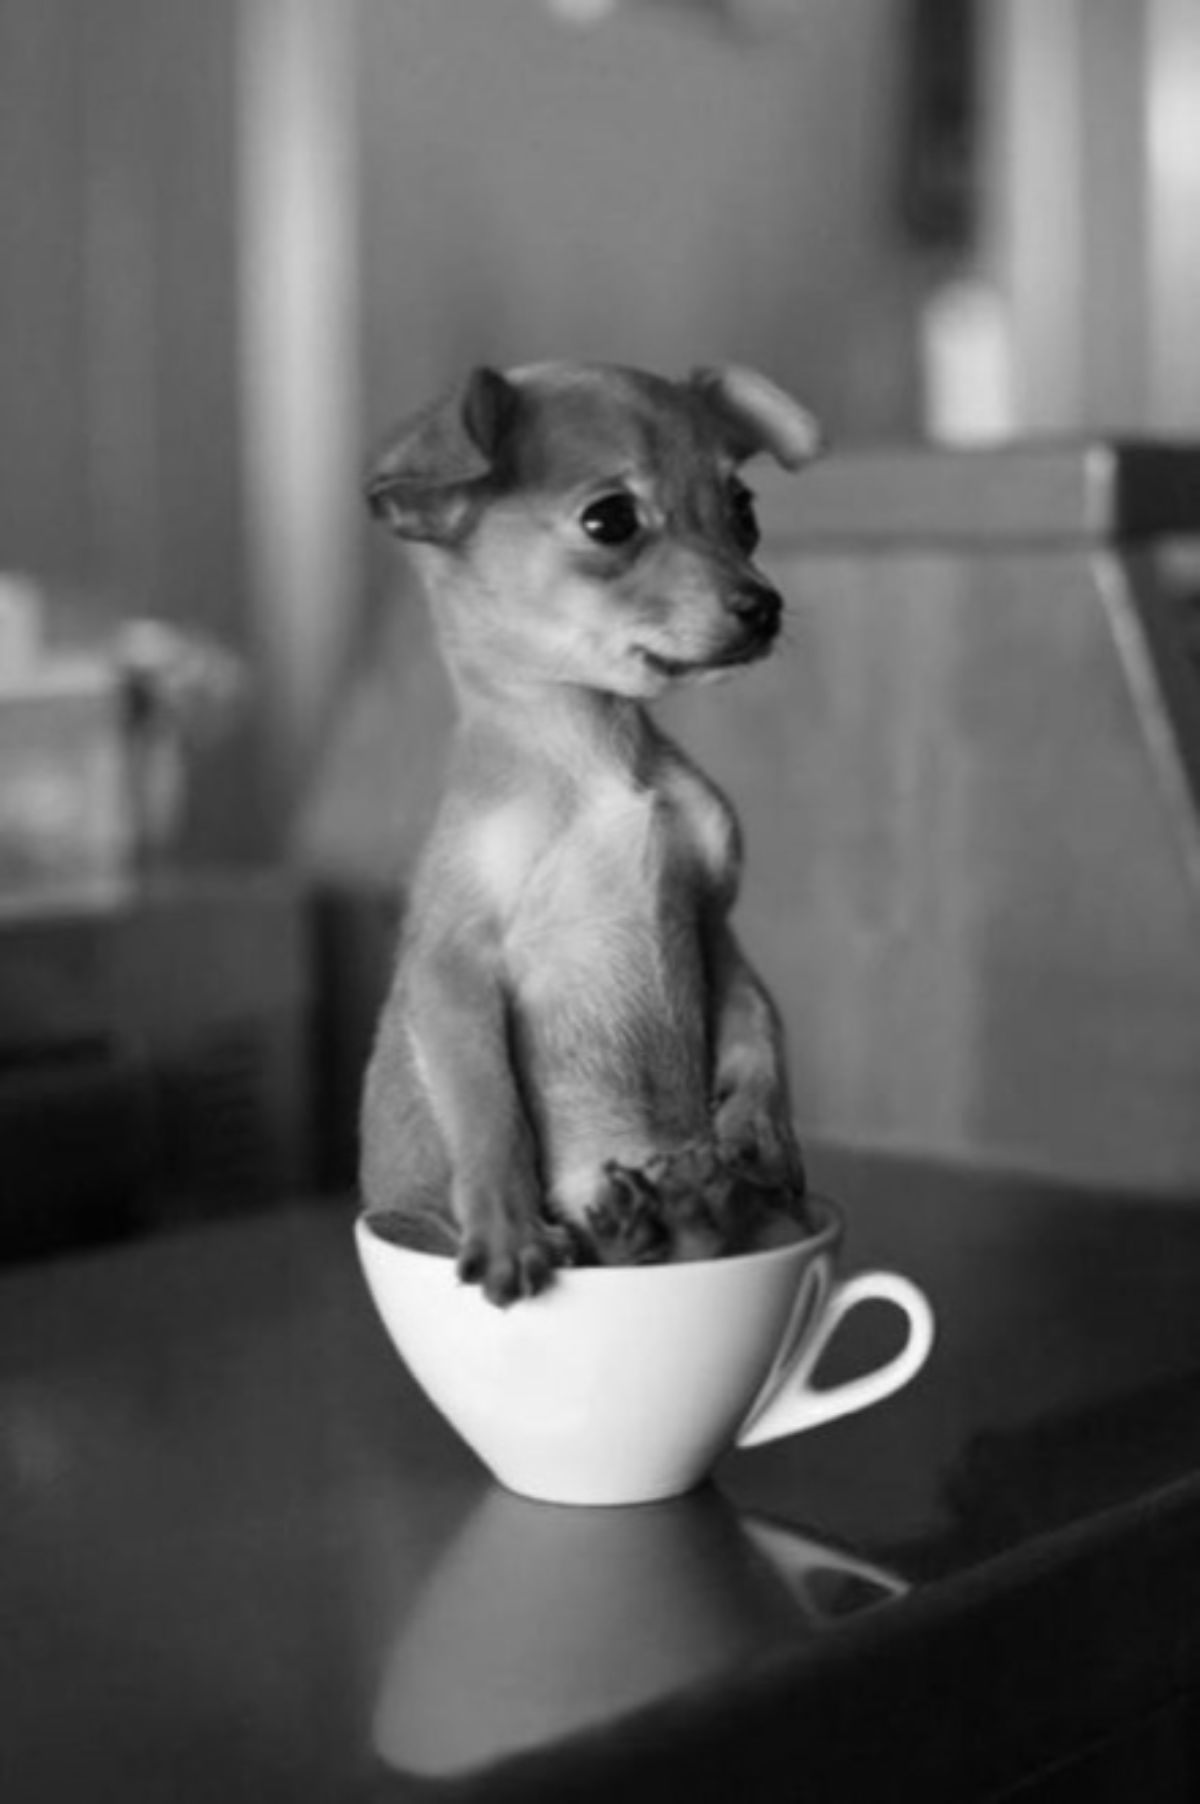 black and white photo of puppy sitting inside a white cup with a handle